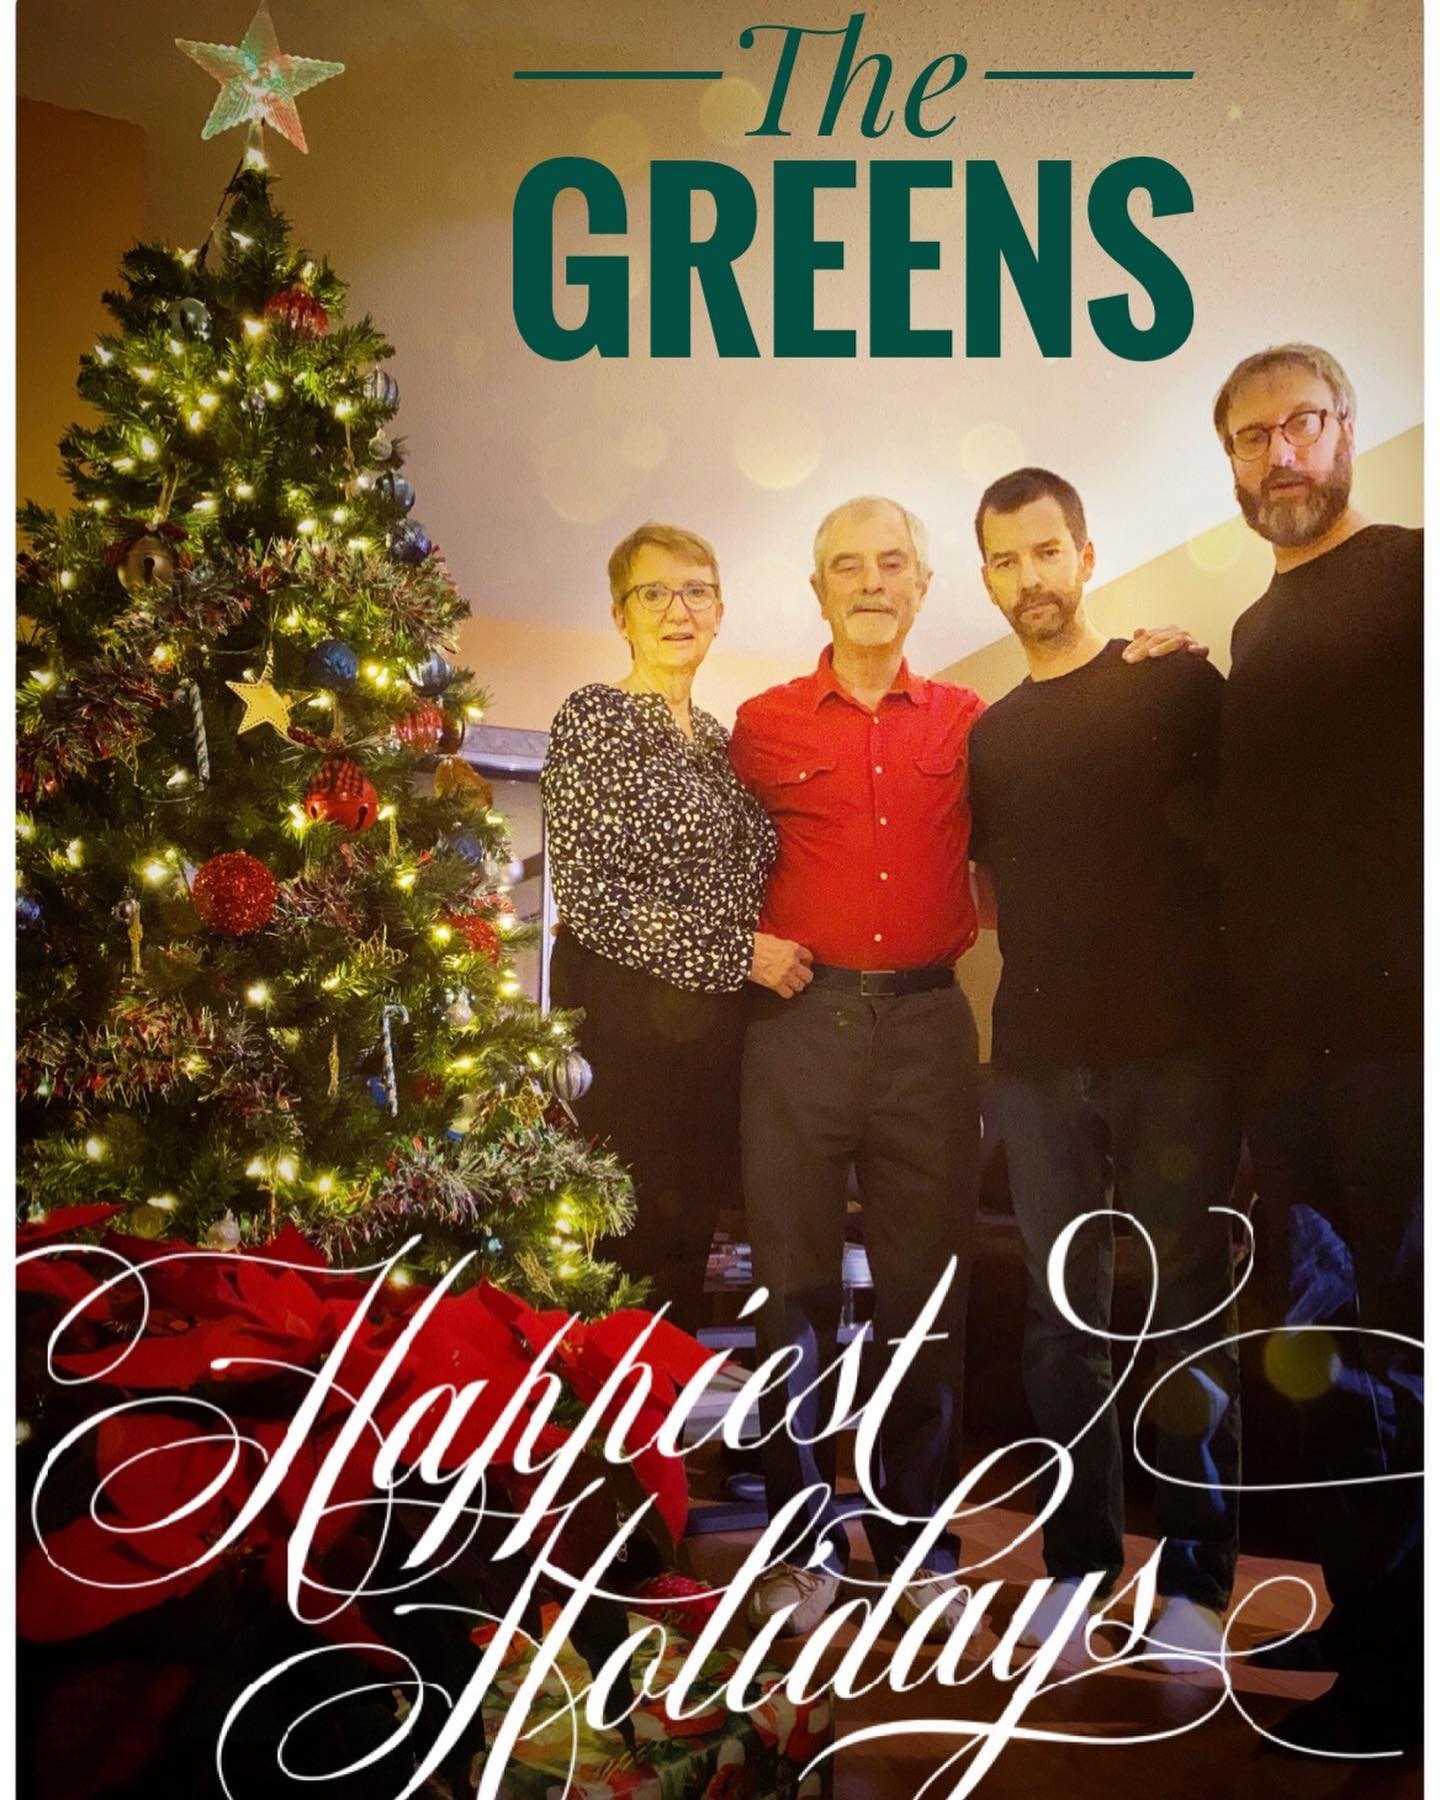 Another post wishing you all a Happy Holidays from The Greens.  Great to be home visiting with family this holiday season.  I hope you are enjoying time with your loved ones at this time of year!  And if for some reason you can’t be due to whatever circumstances please try to have a happy day regardless.  And know that I love you!  Best wishes!  Tom